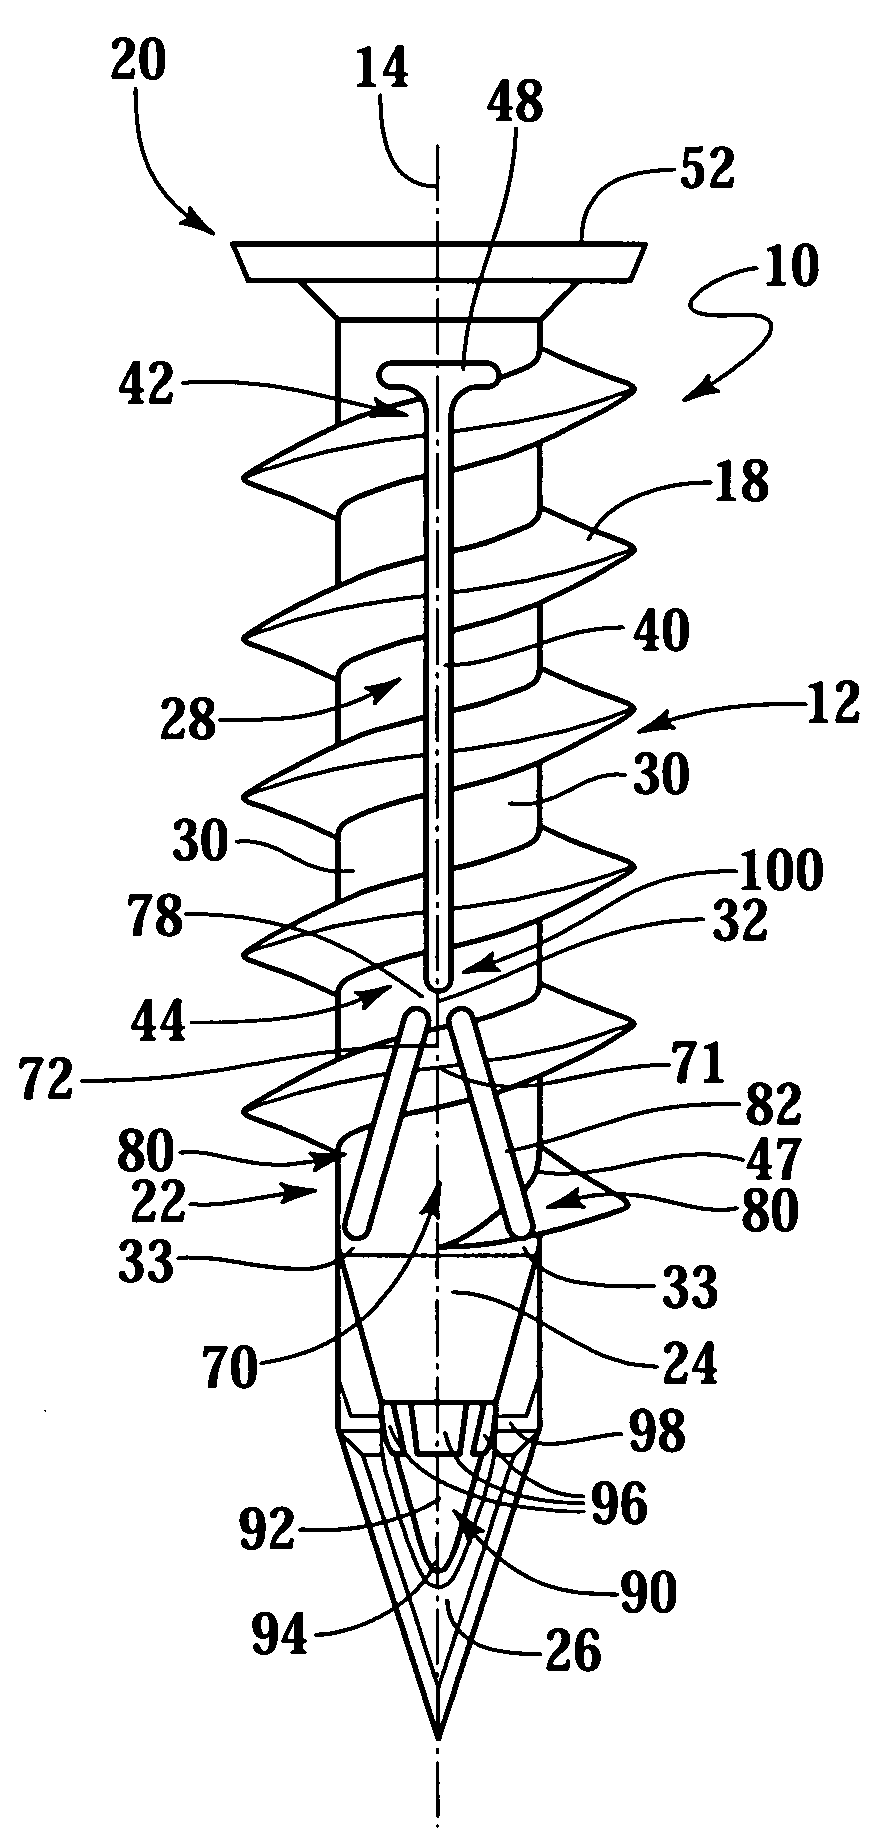 Self-drilling anchor